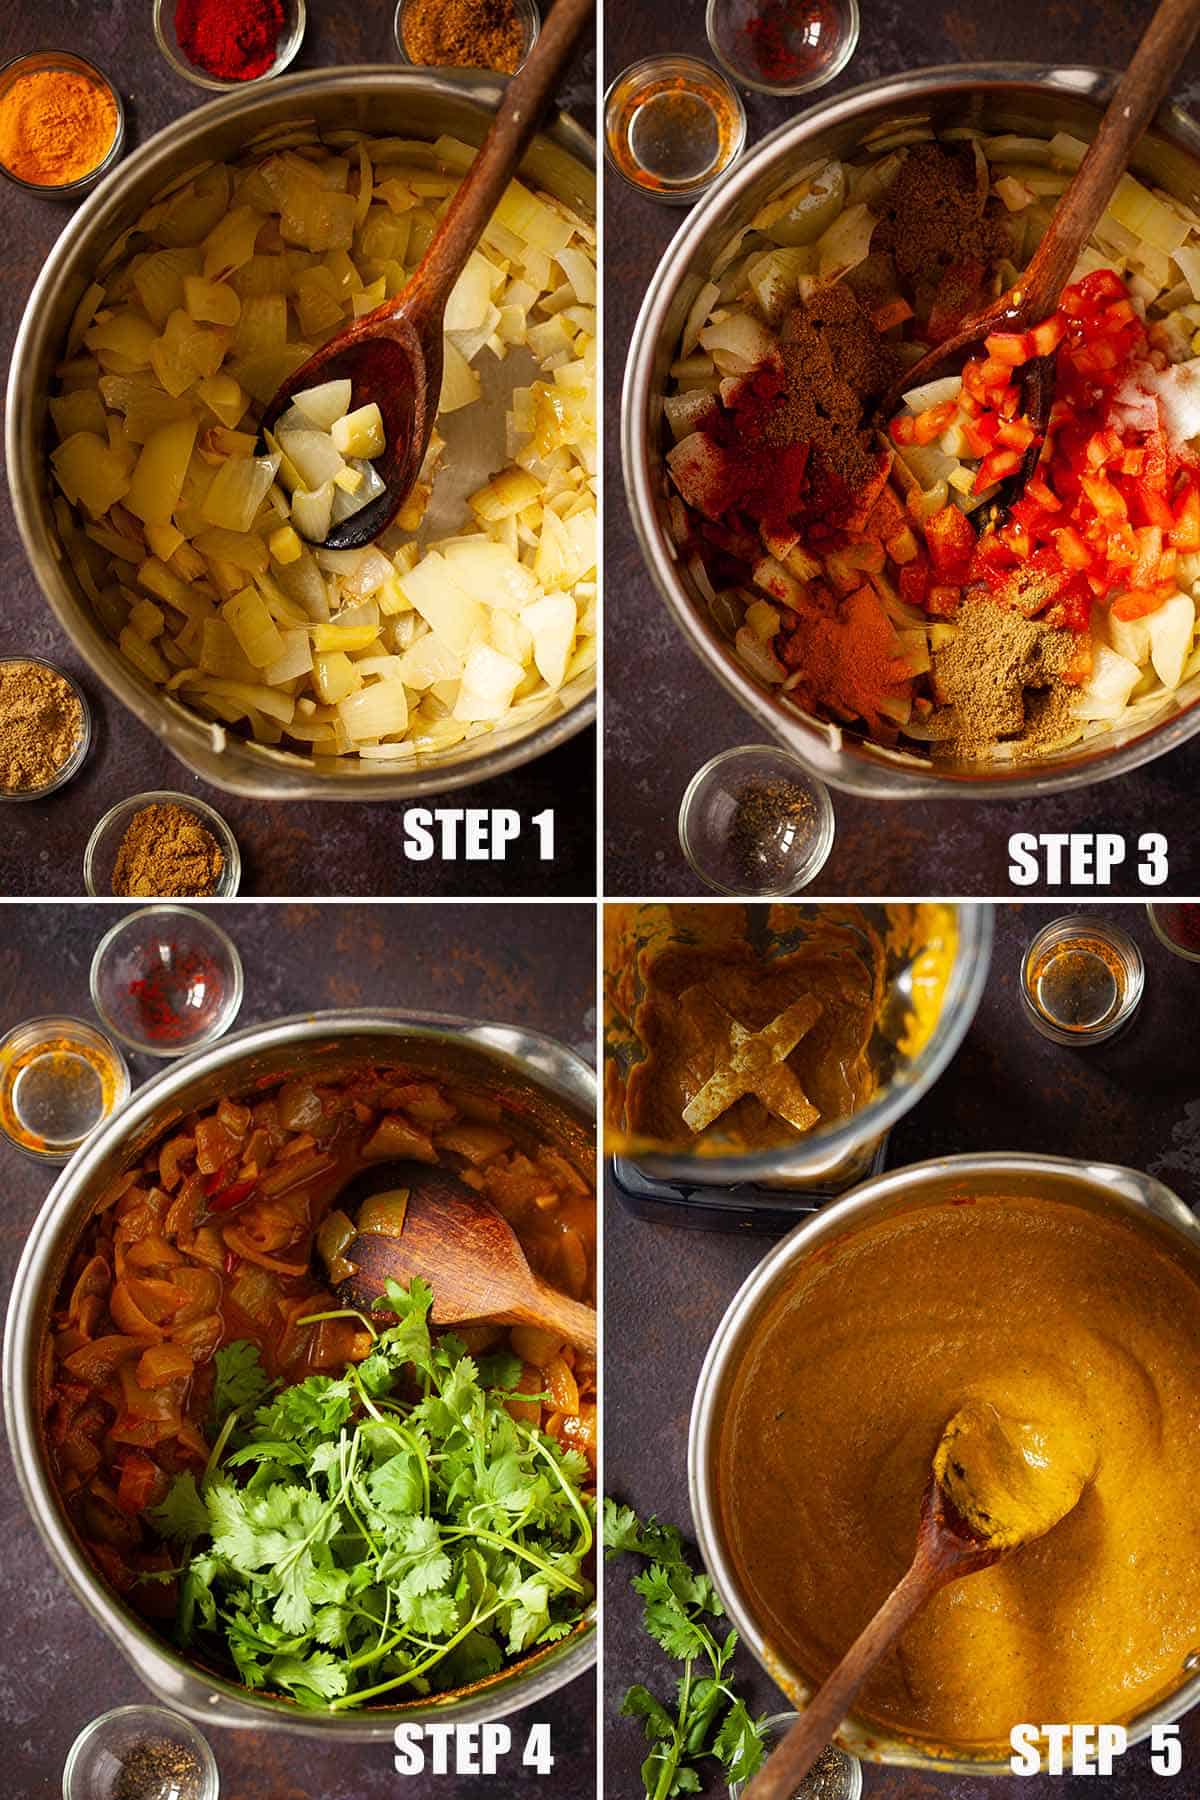 Collage of images showing balti sauce being made.